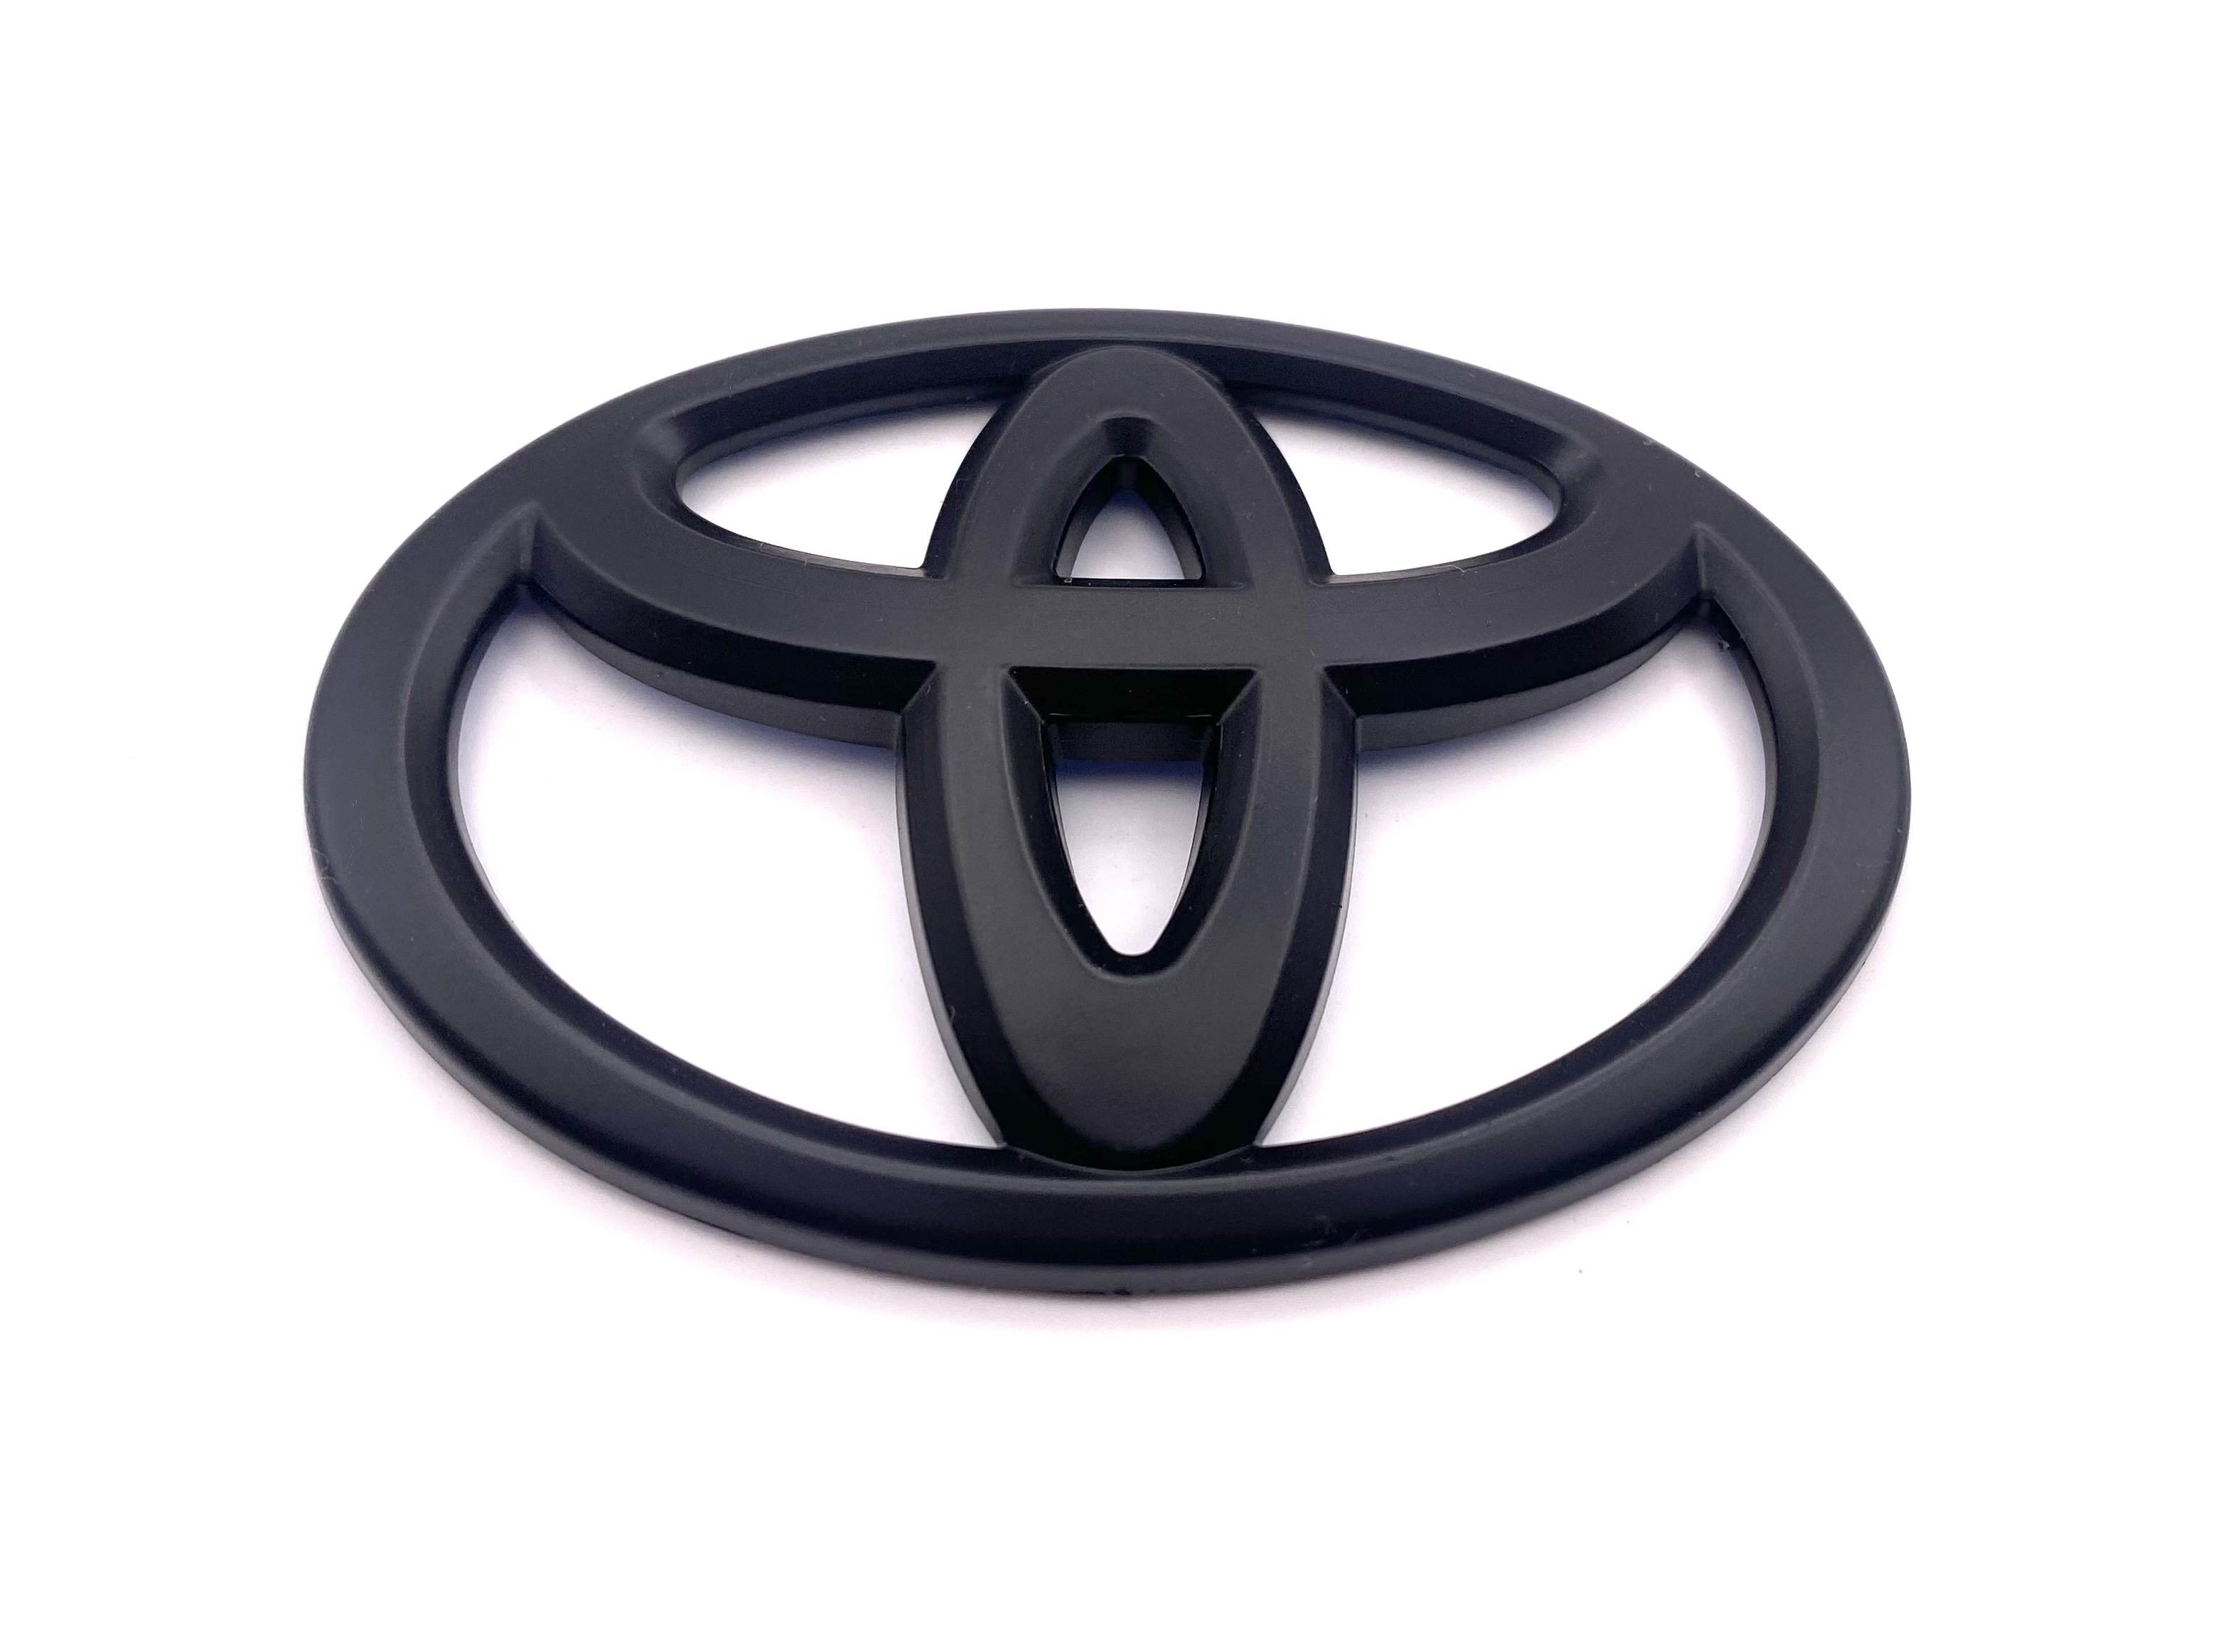 Steering Wheel / Airbag Emblem Replacement for Toyota Models